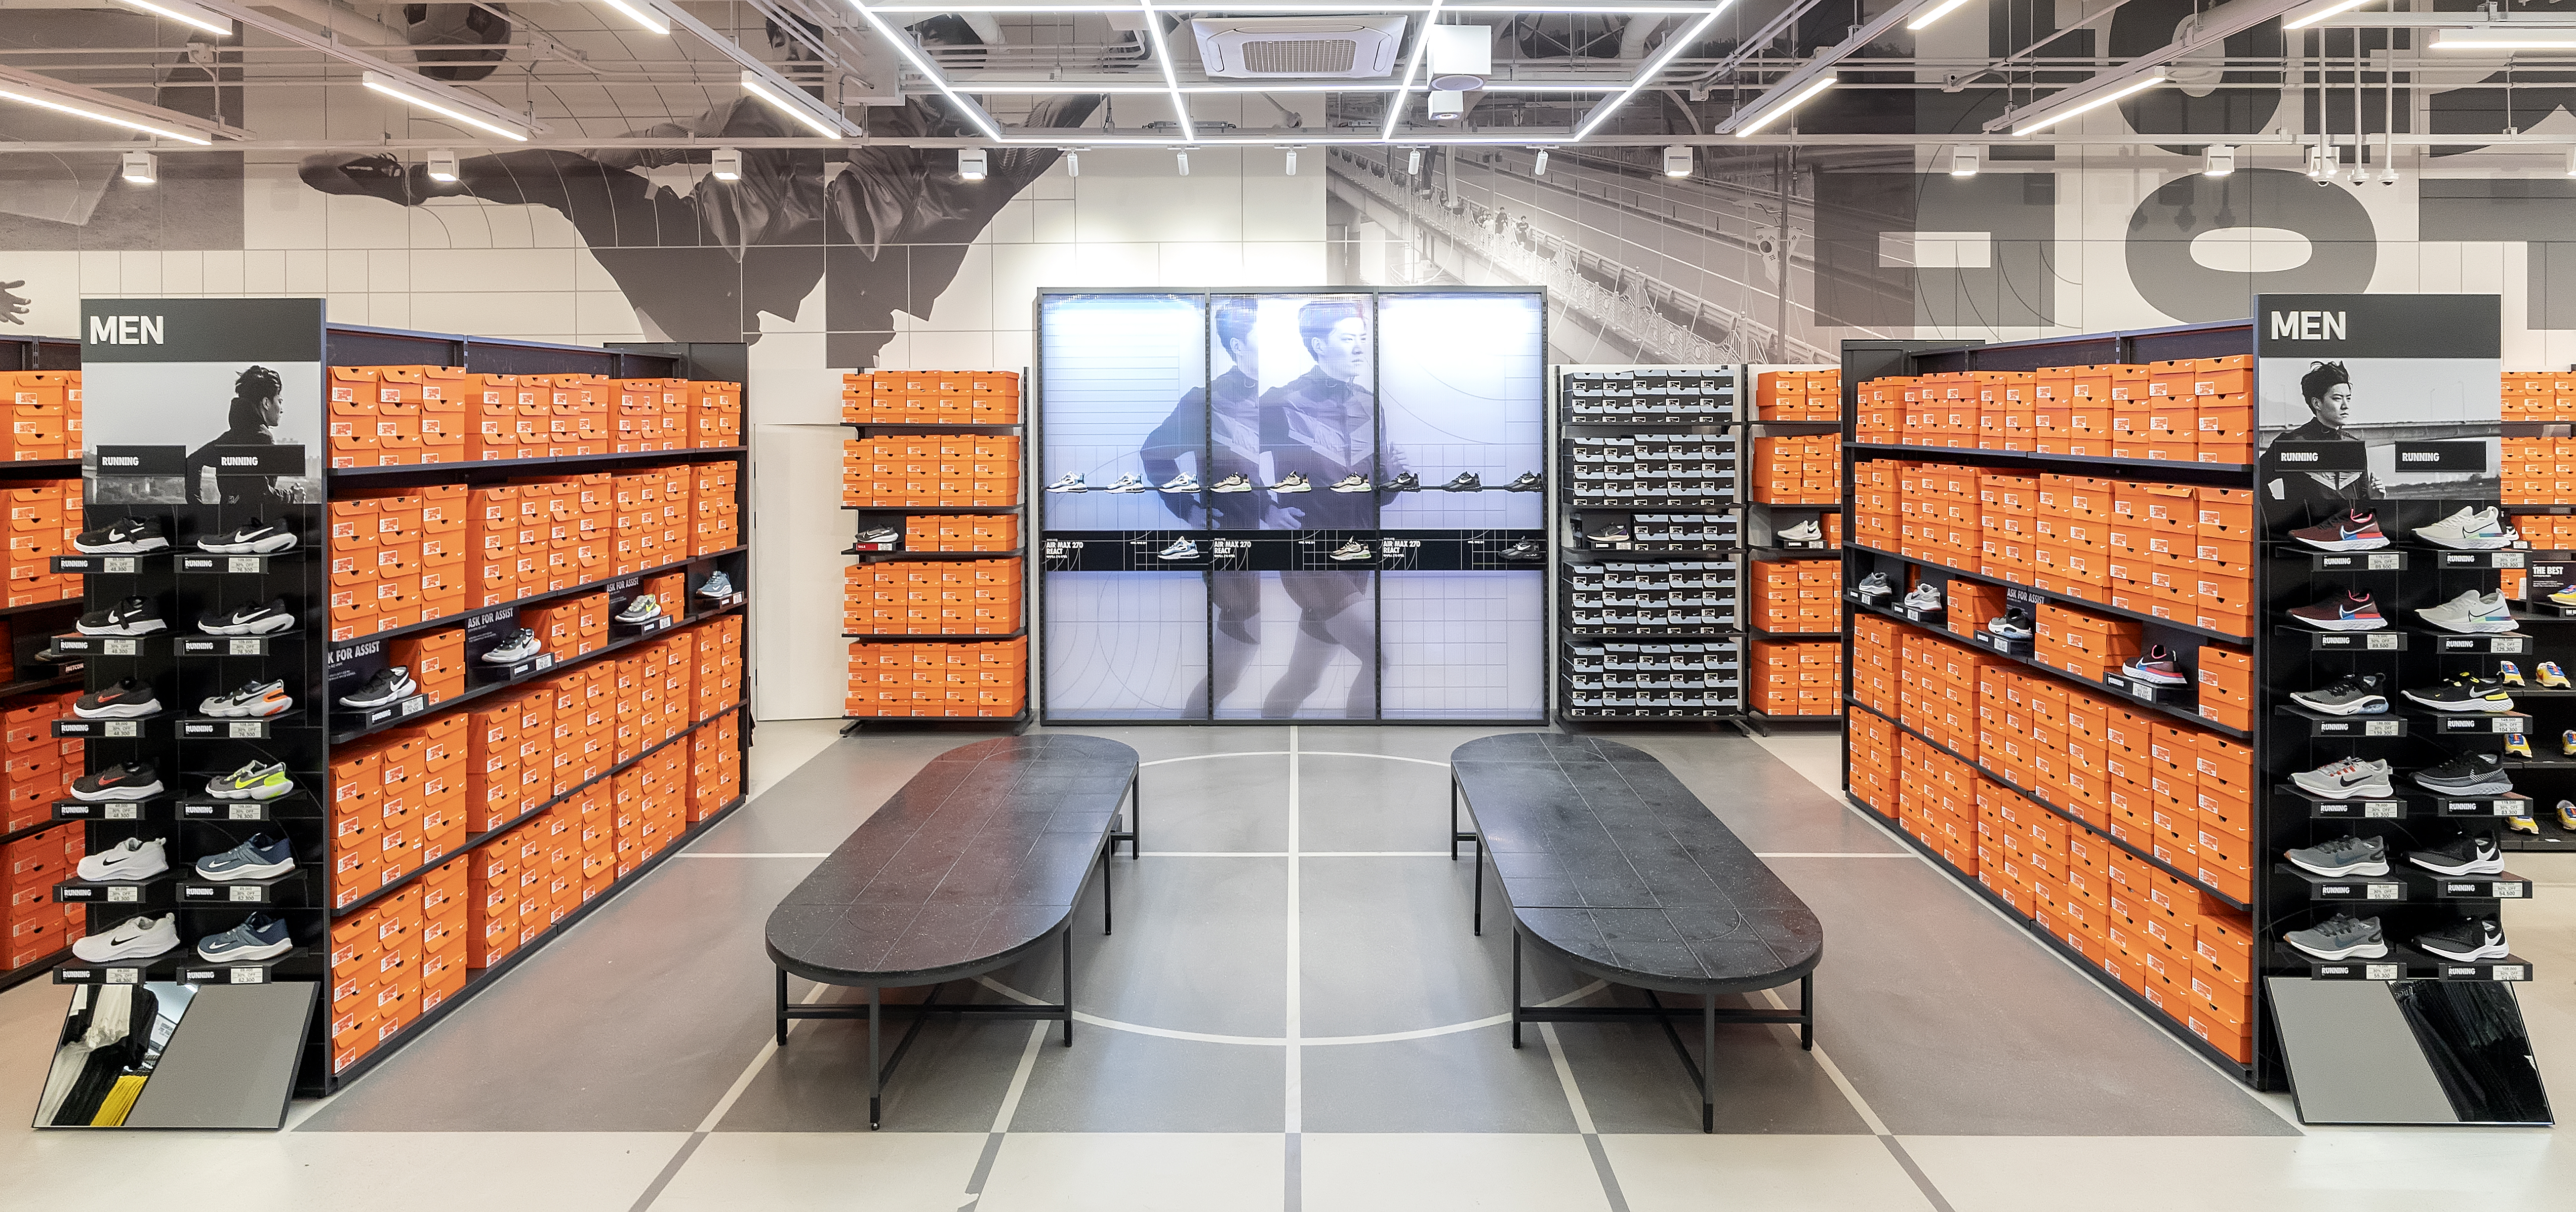 San Antonio one of 9 cities in world with new 'Nike Unite' concept store